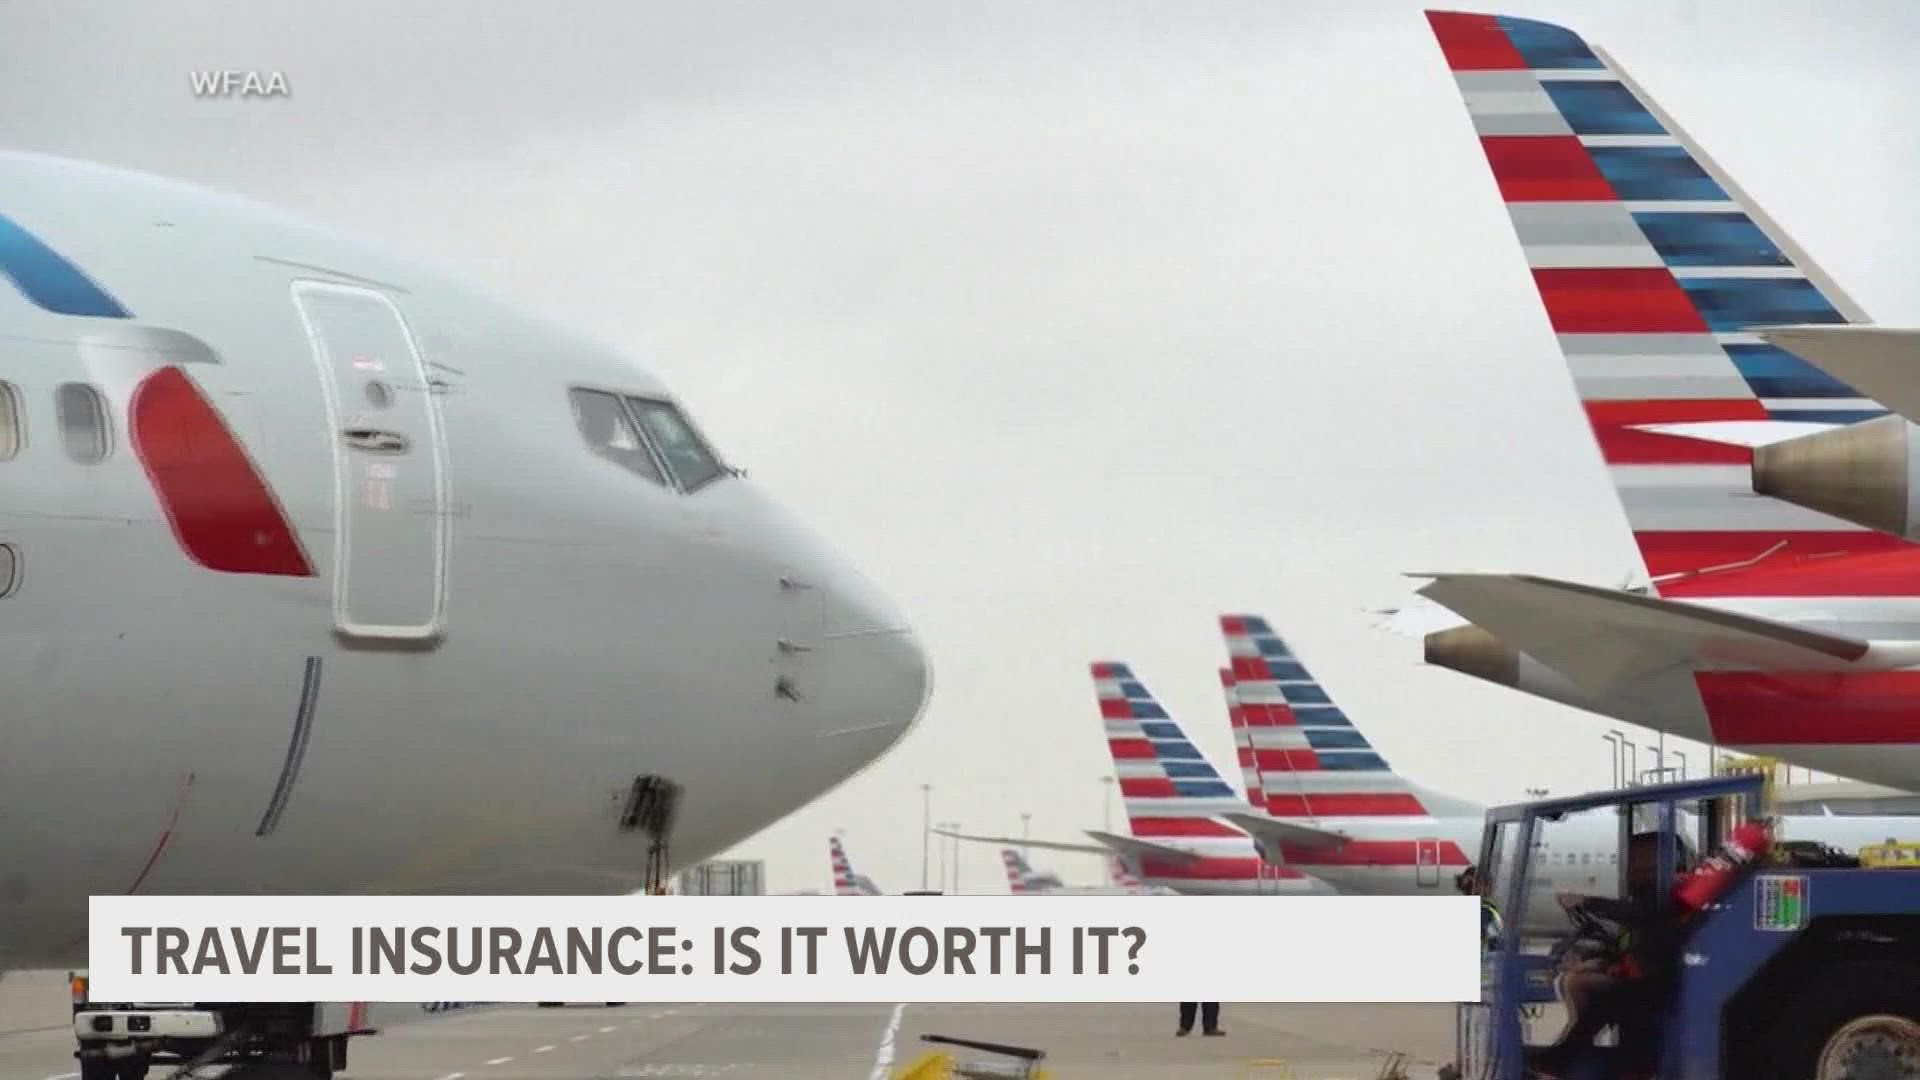 With many holiday flights being canceled in 2022, an expert is discussing why travel insurance could be the right choice for you.